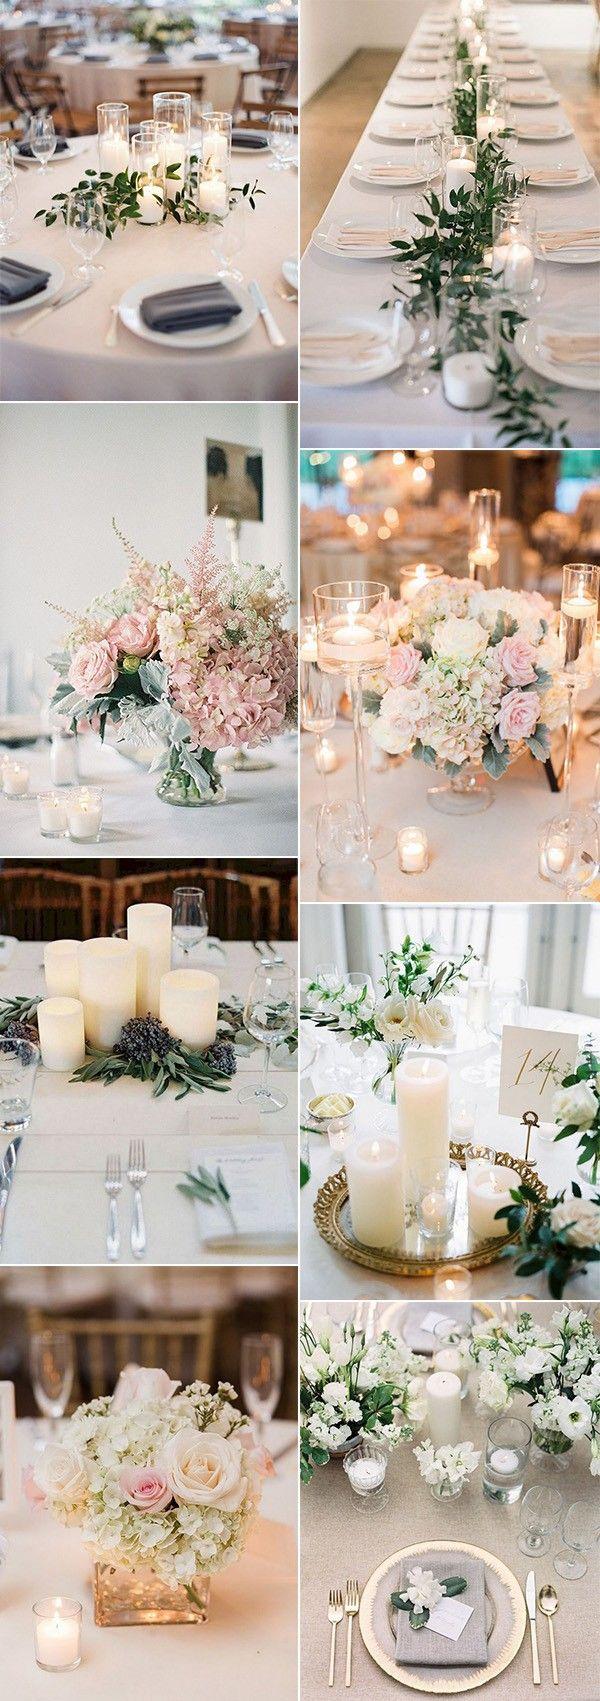 Mariage - 20 Elegant Wedding Centerpieces With Candles For 2018 Trends